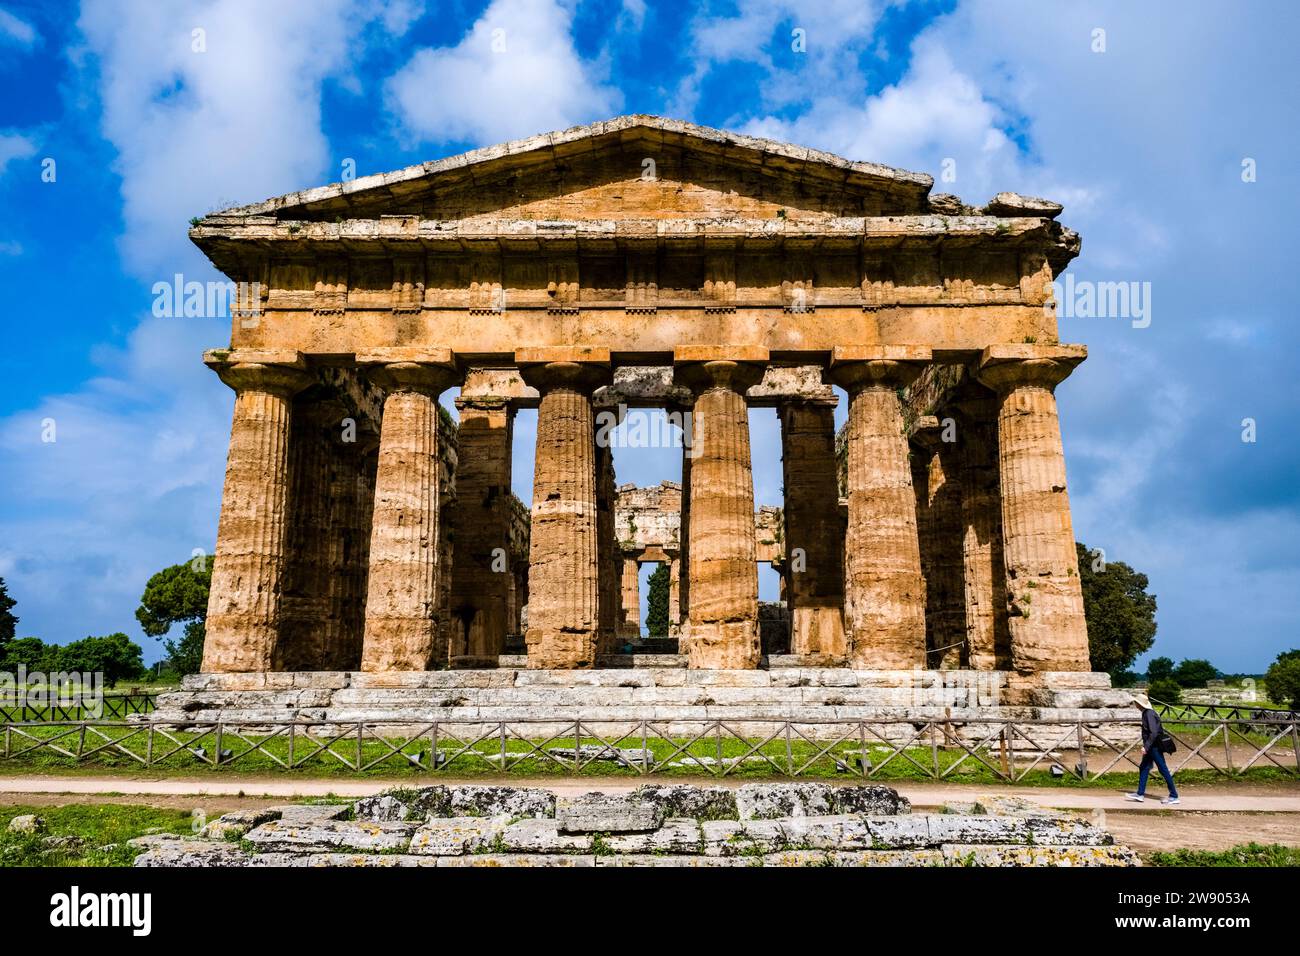 Second Temple of Hera, belonging to the ruins of Paestum, an important ancient Greek city on the coast of the Tyrrhenian Sea. Stock Photo